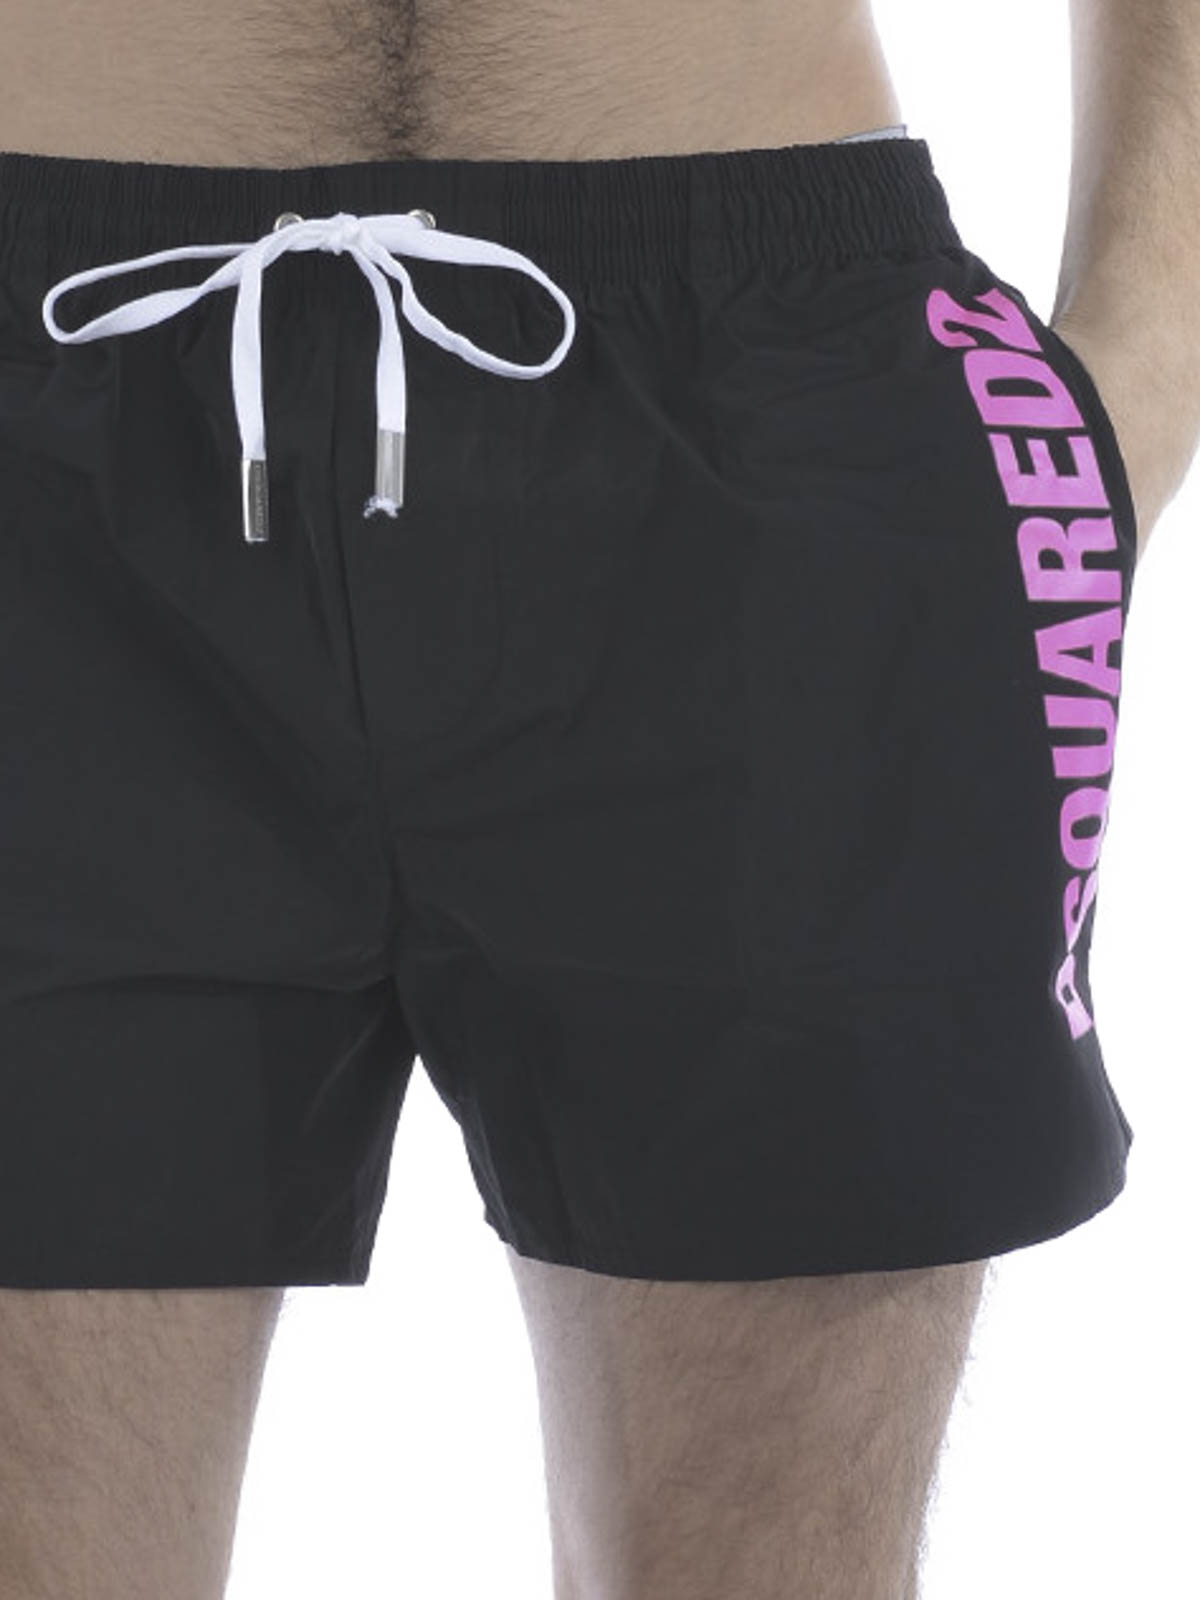 dsquared swimming trunks